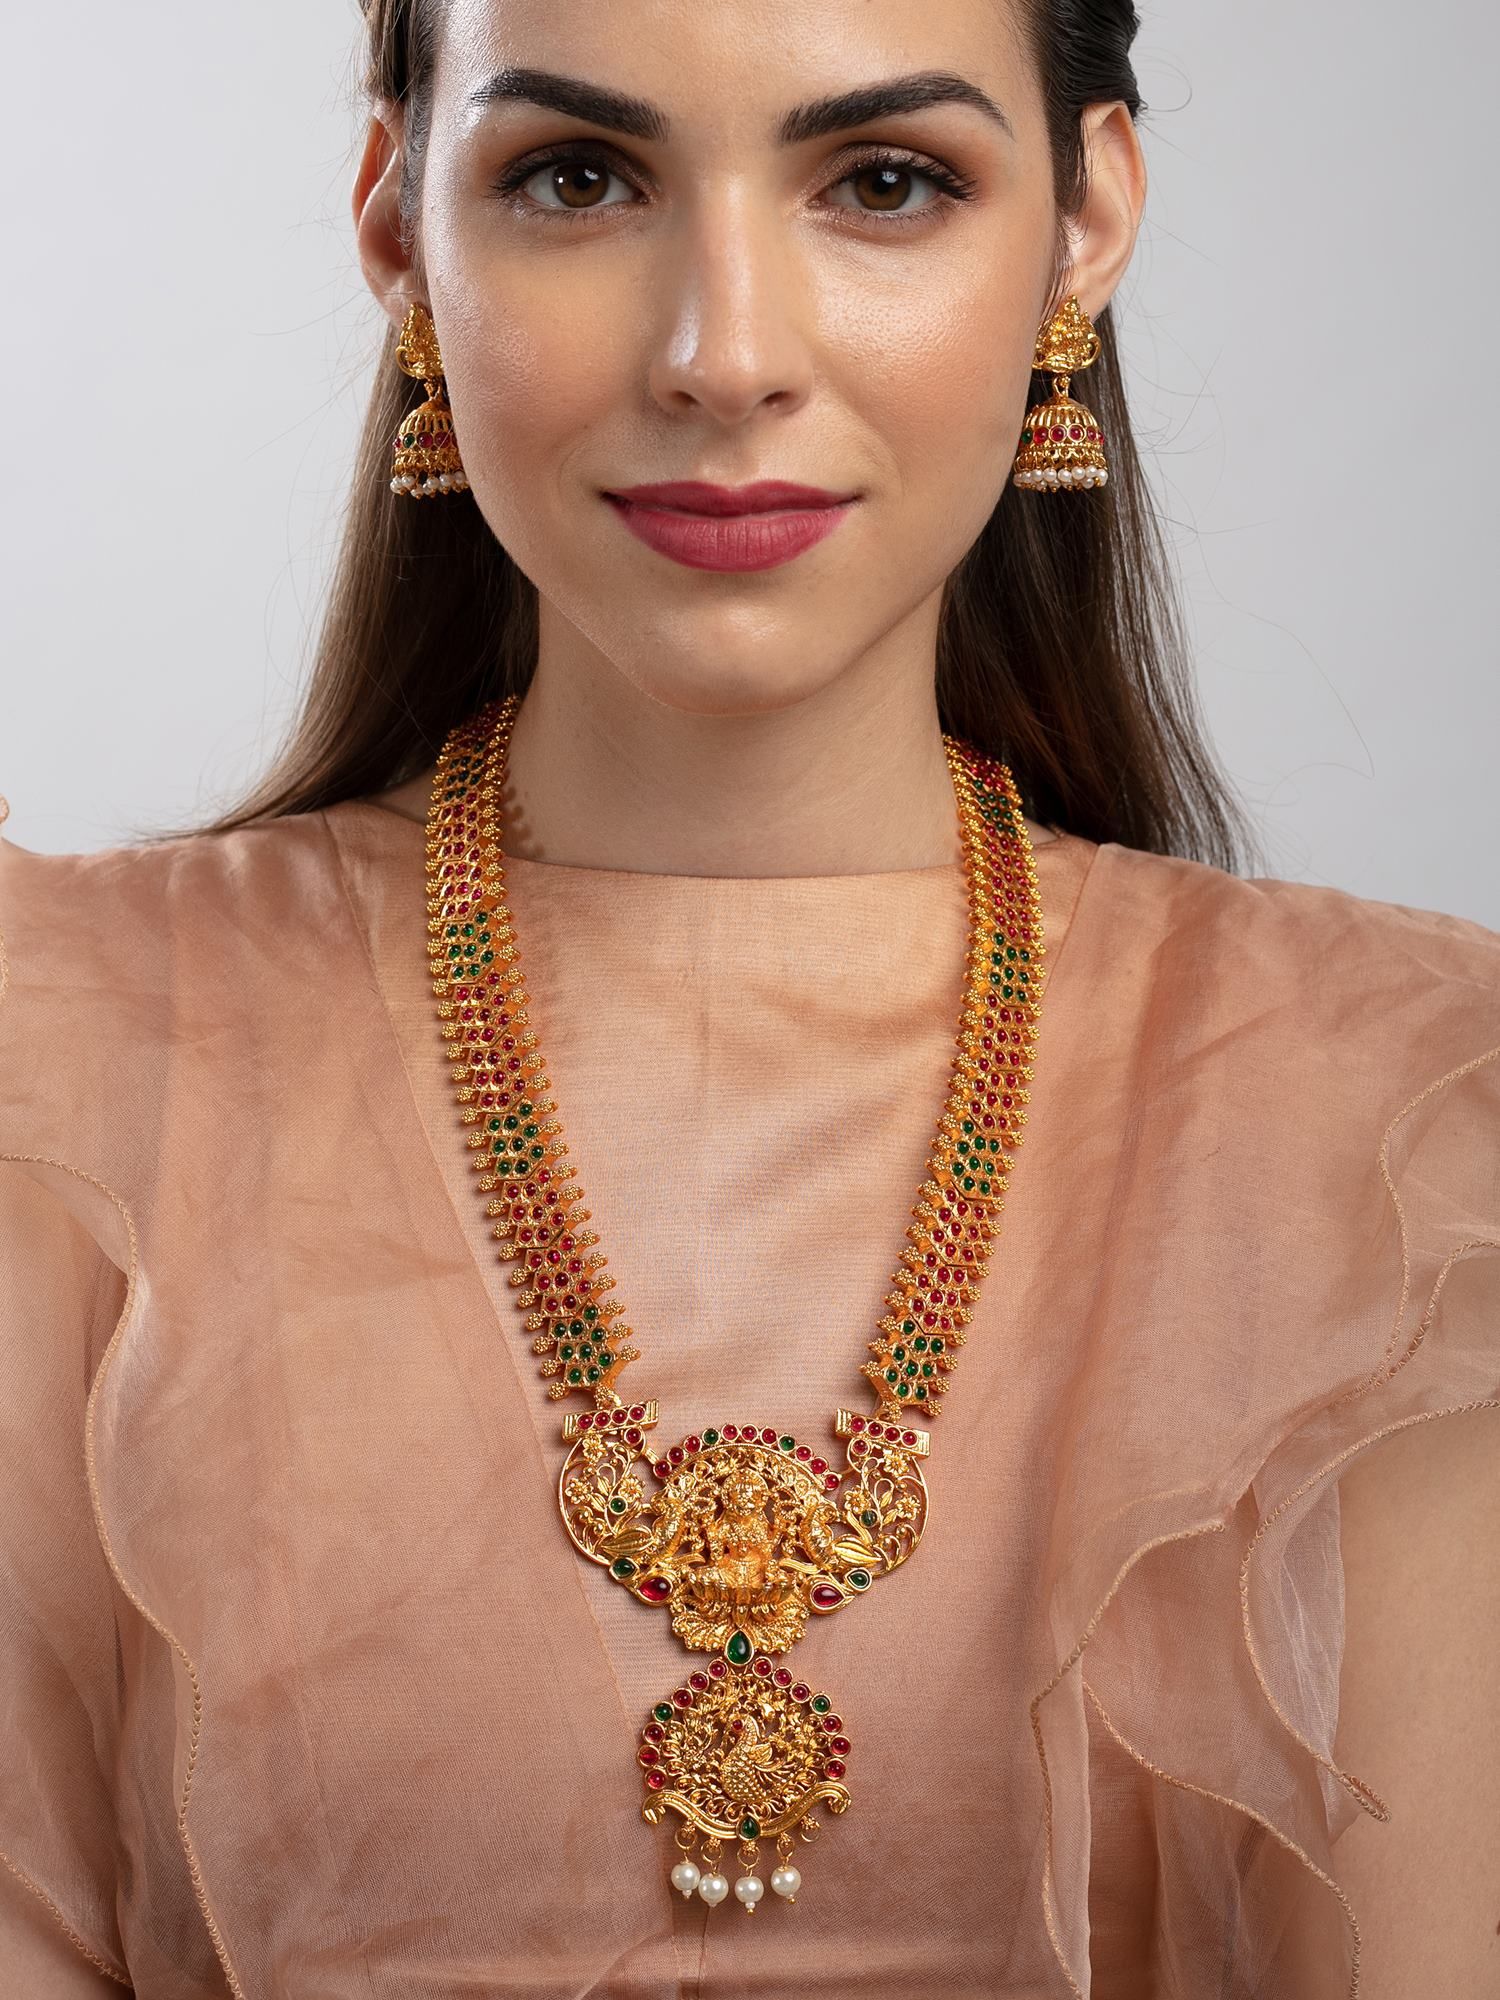 Buy gold plated imitation jewelry necklace sets online - Griiham-hanic.com.vn